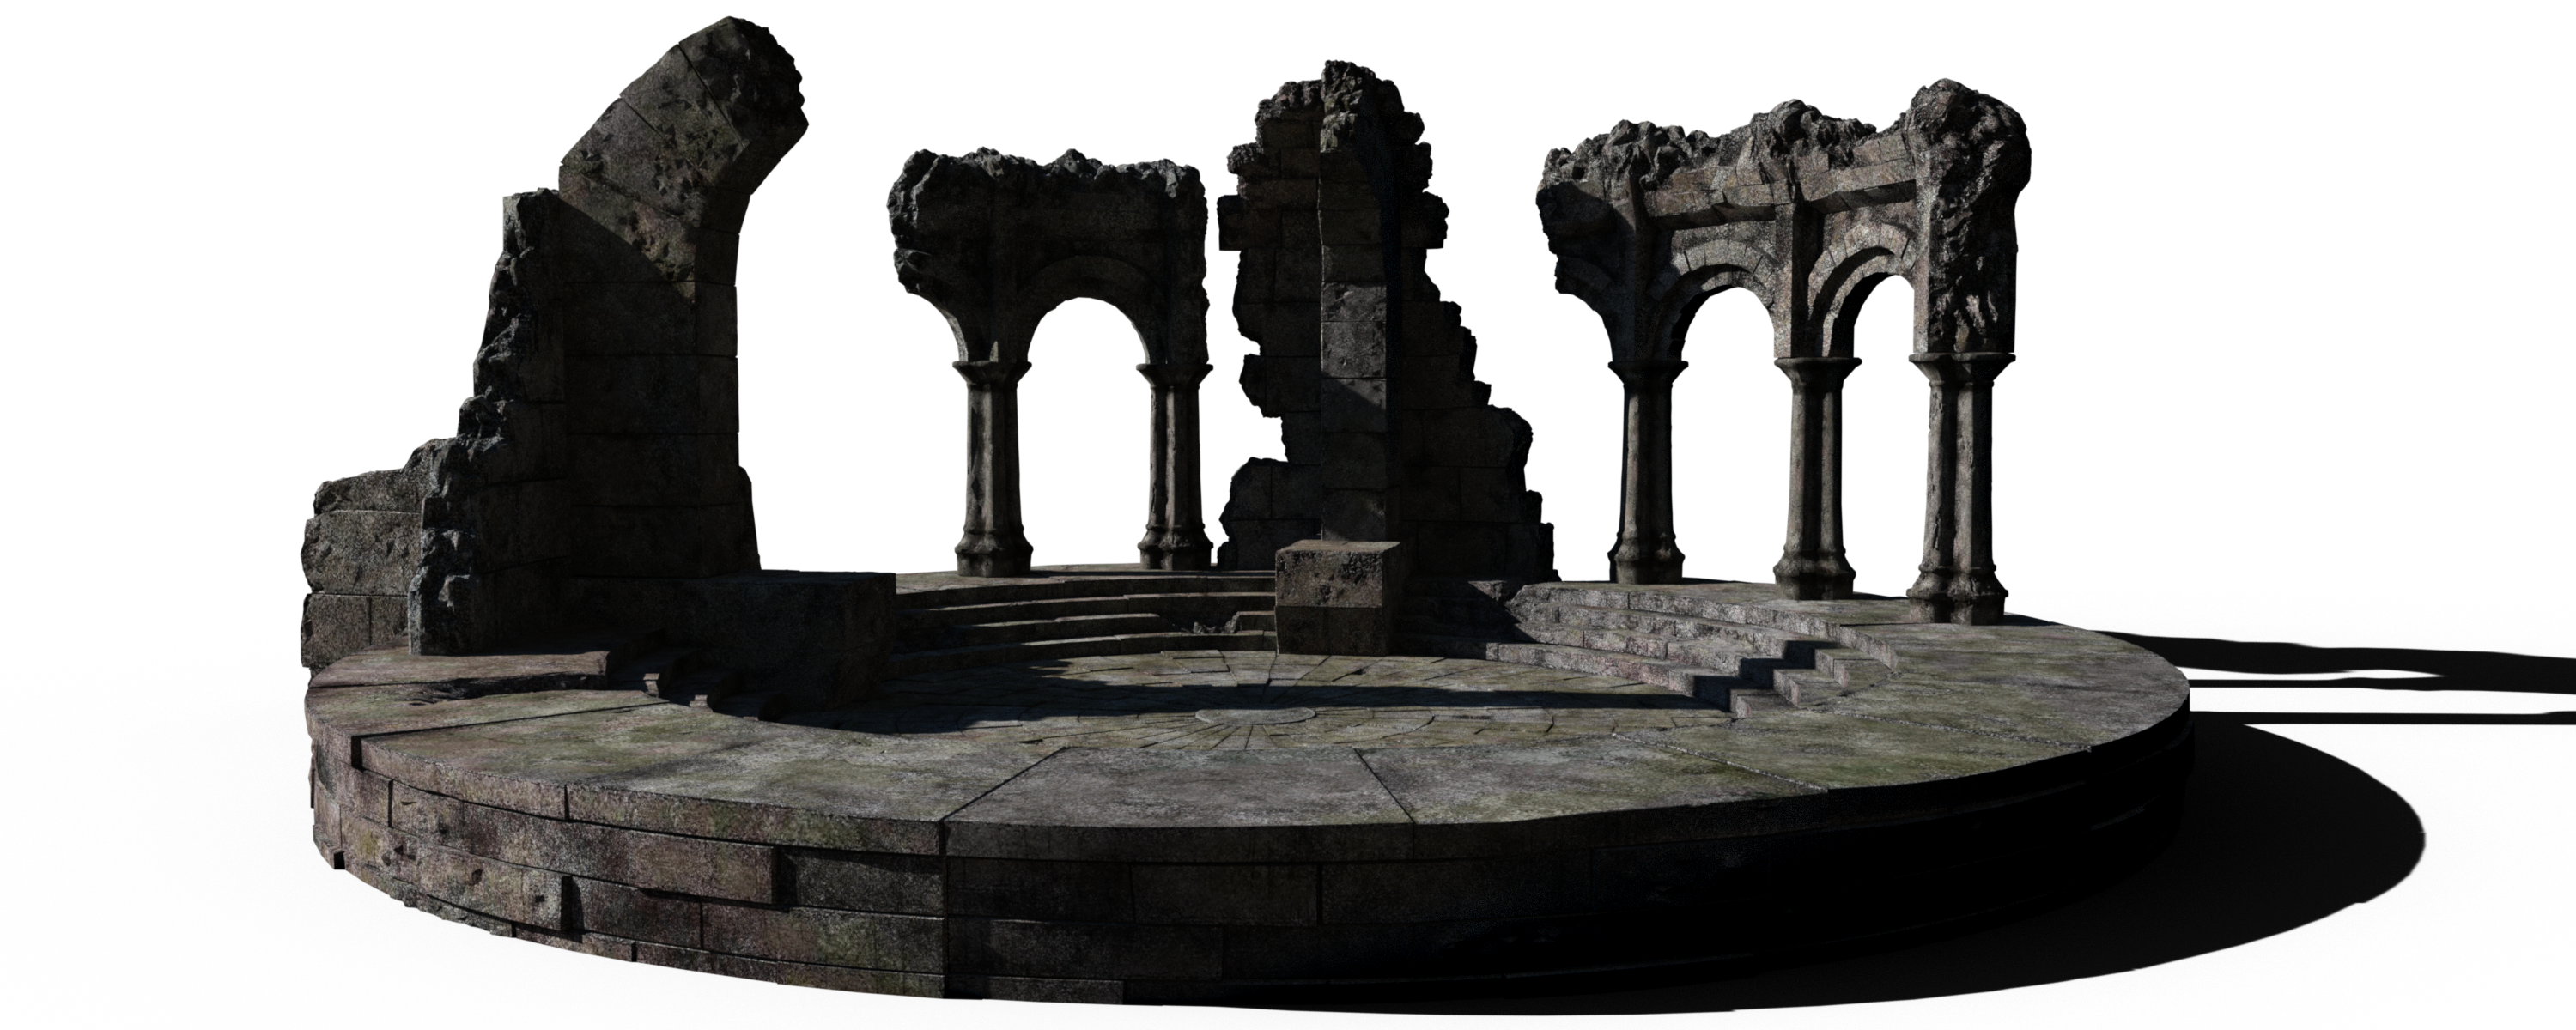 Temple Ruins 01 by coolzero2a on DeviantArt